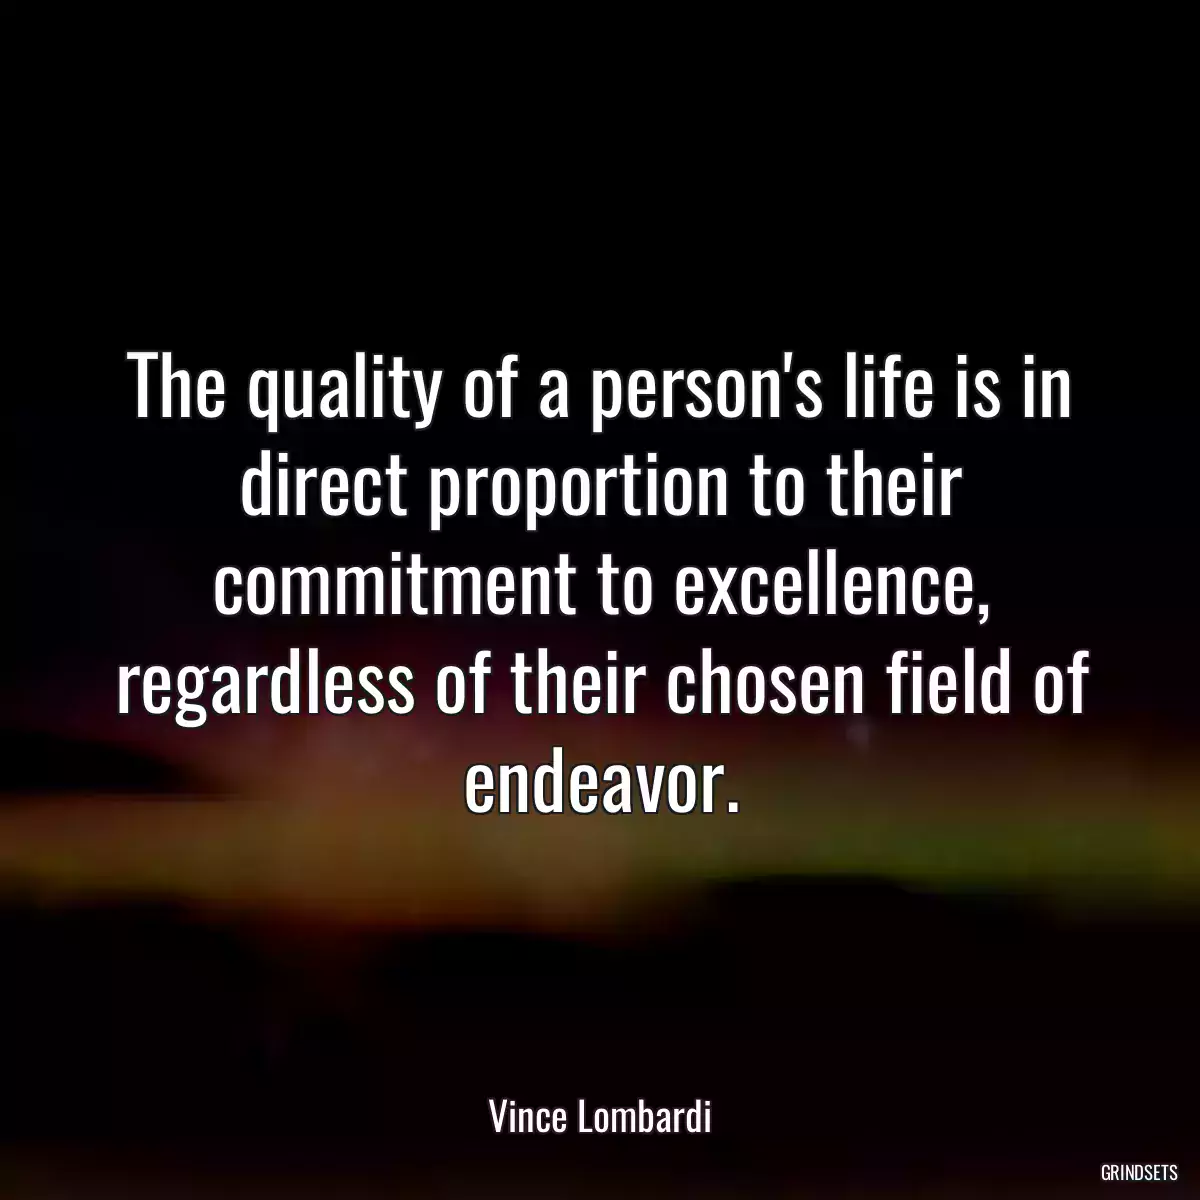 The quality of a person\'s life is in direct proportion to their commitment to excellence, regardless of their chosen field of endeavor.